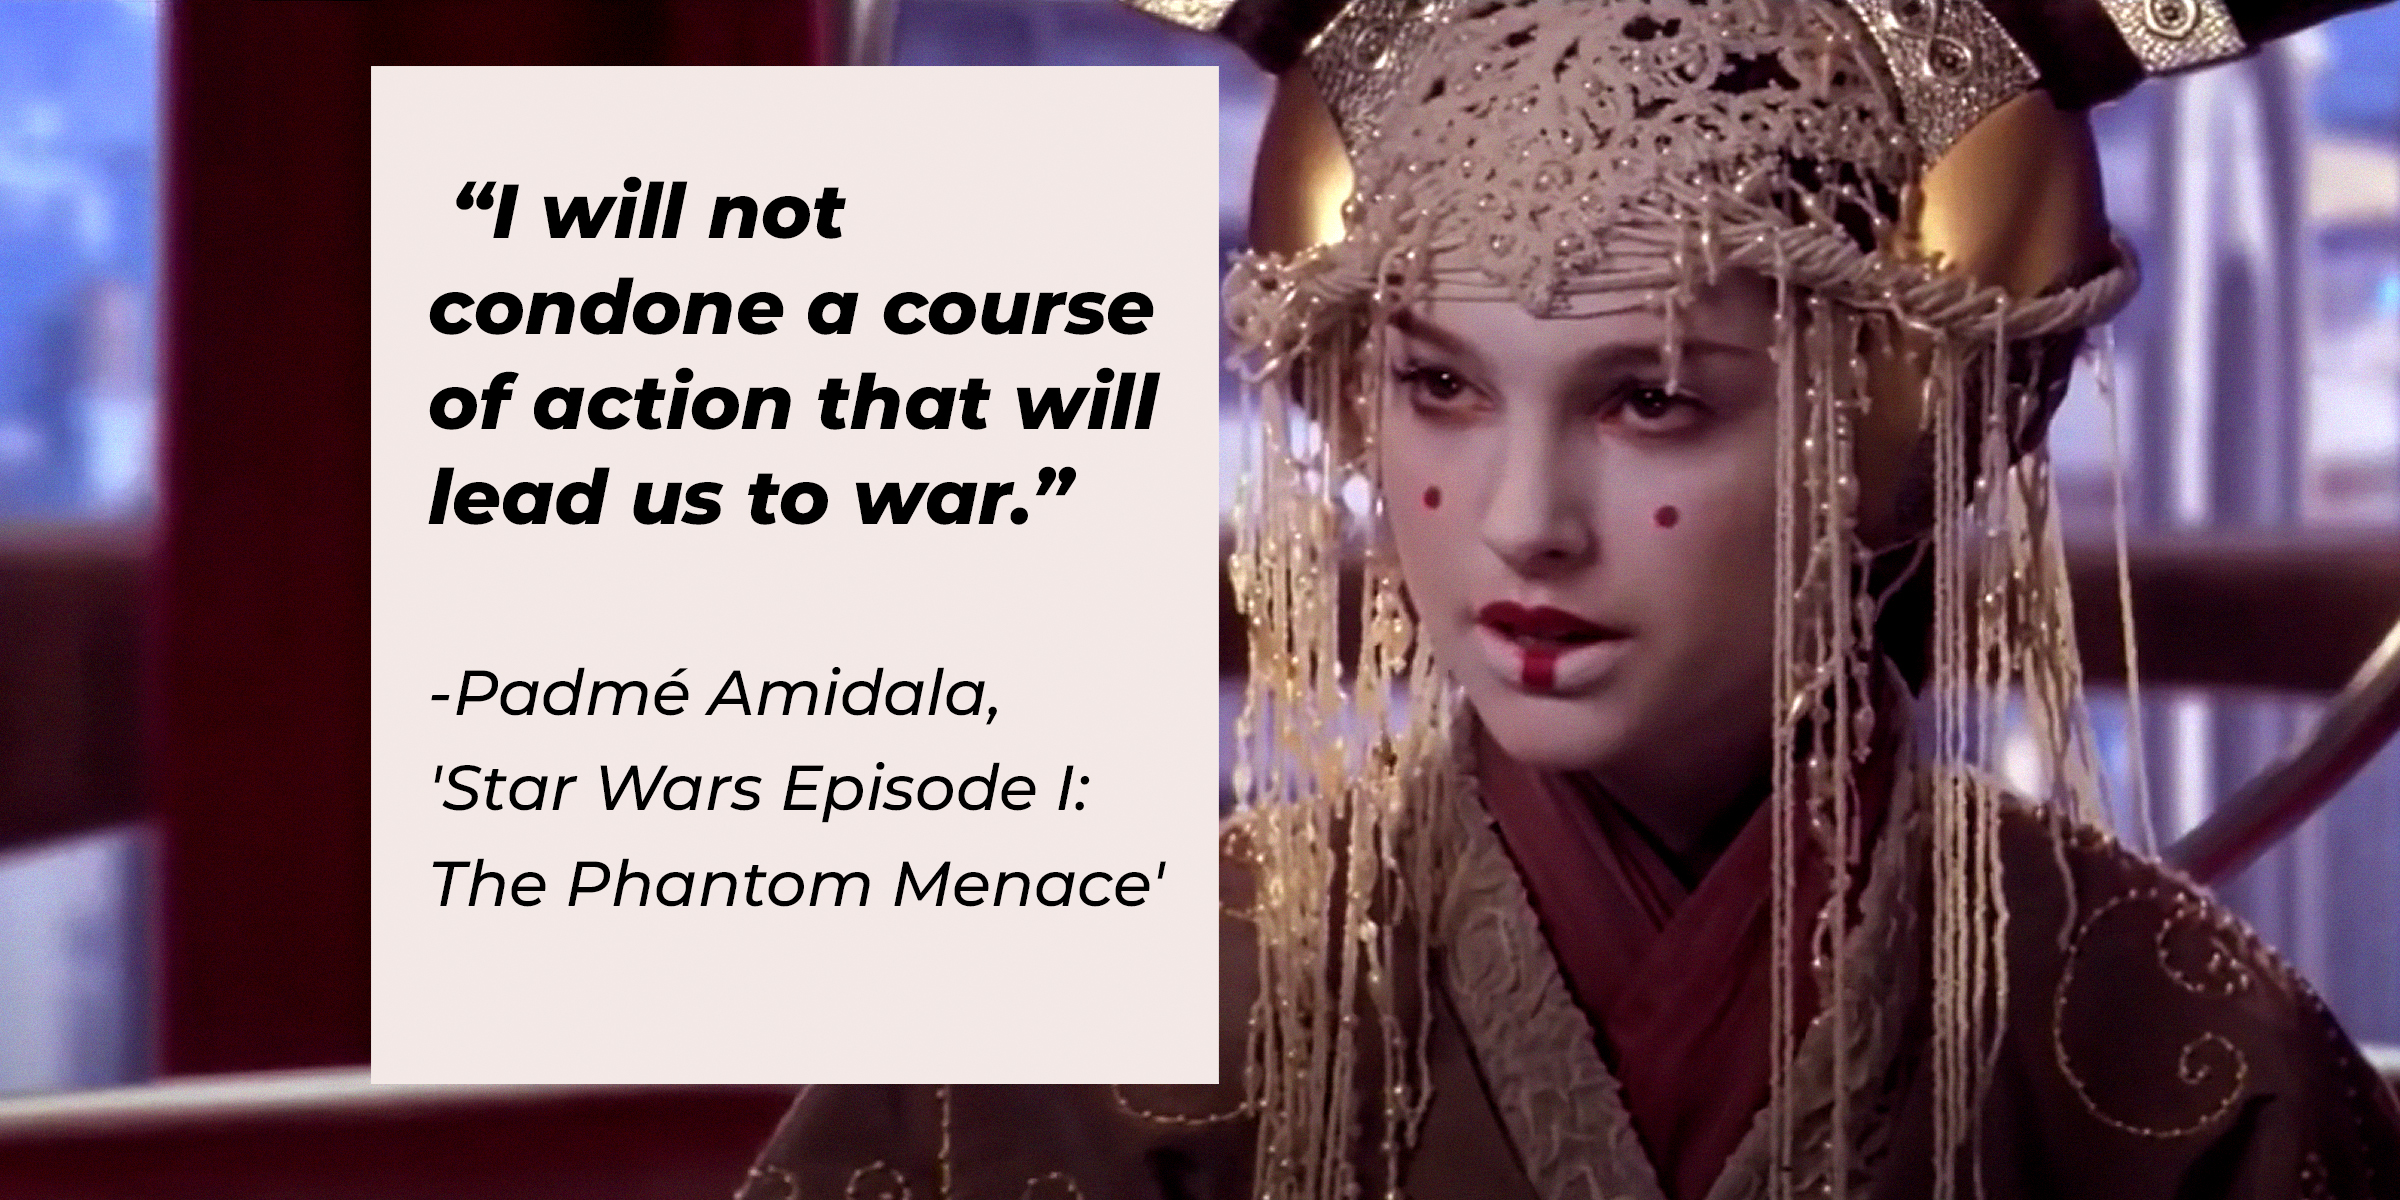 Padmé Amidala with her quote: "I will not condone a course of action that will lead us to war." | Source: Facebook.com/StarWars